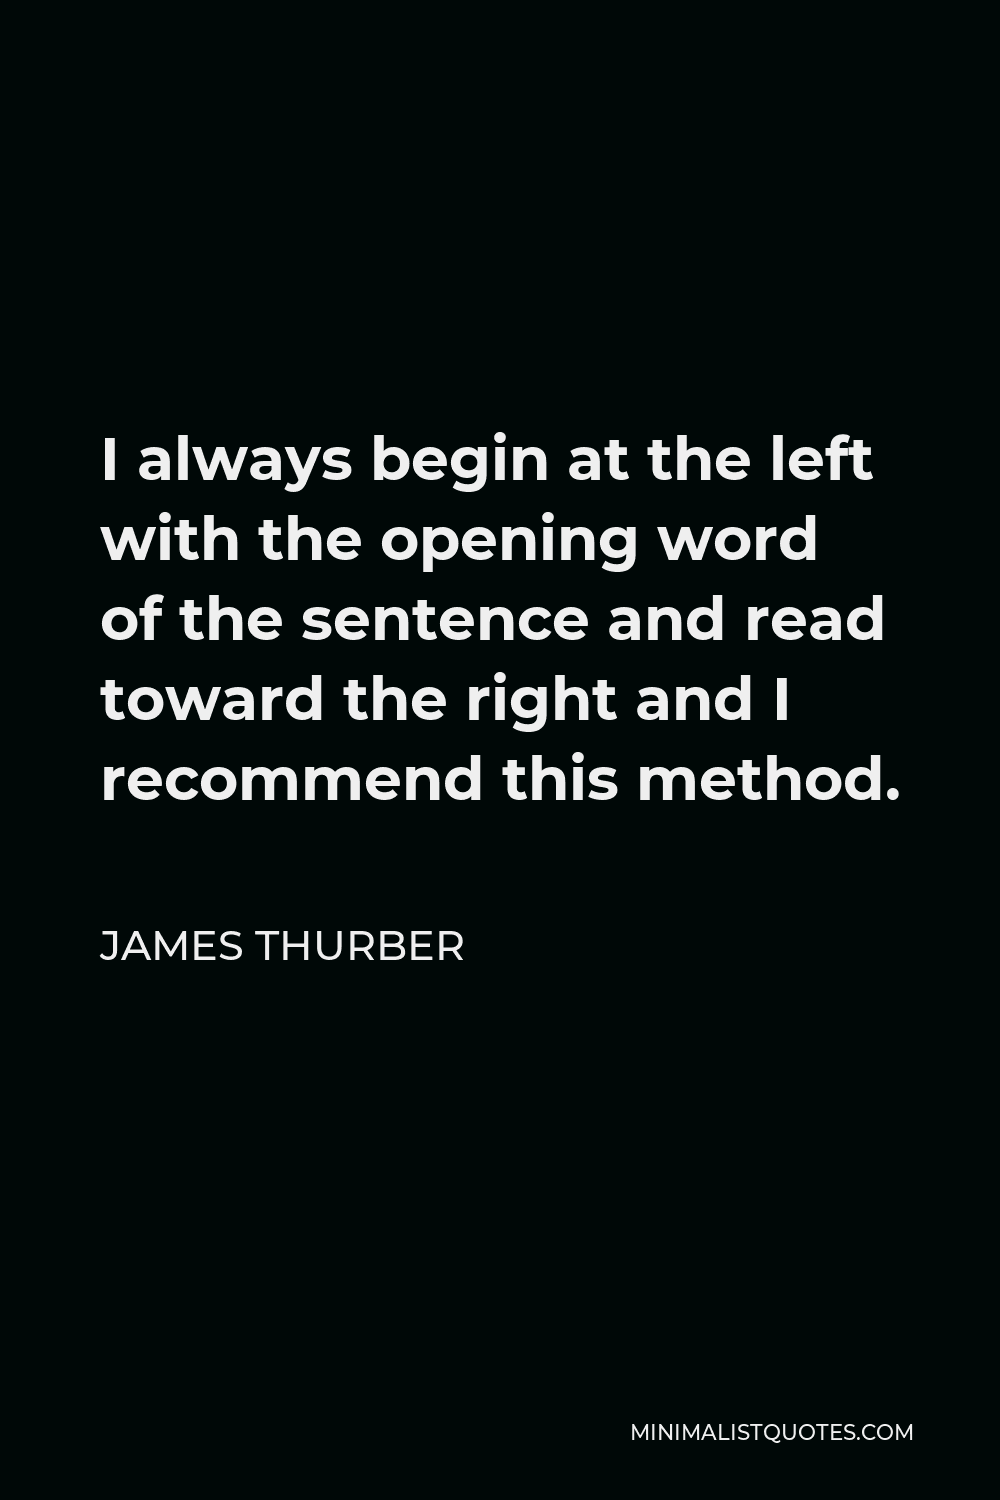 James Thurber Quote - I always begin at the left with the opening word of the sentence and read toward the right and I recommend this method.